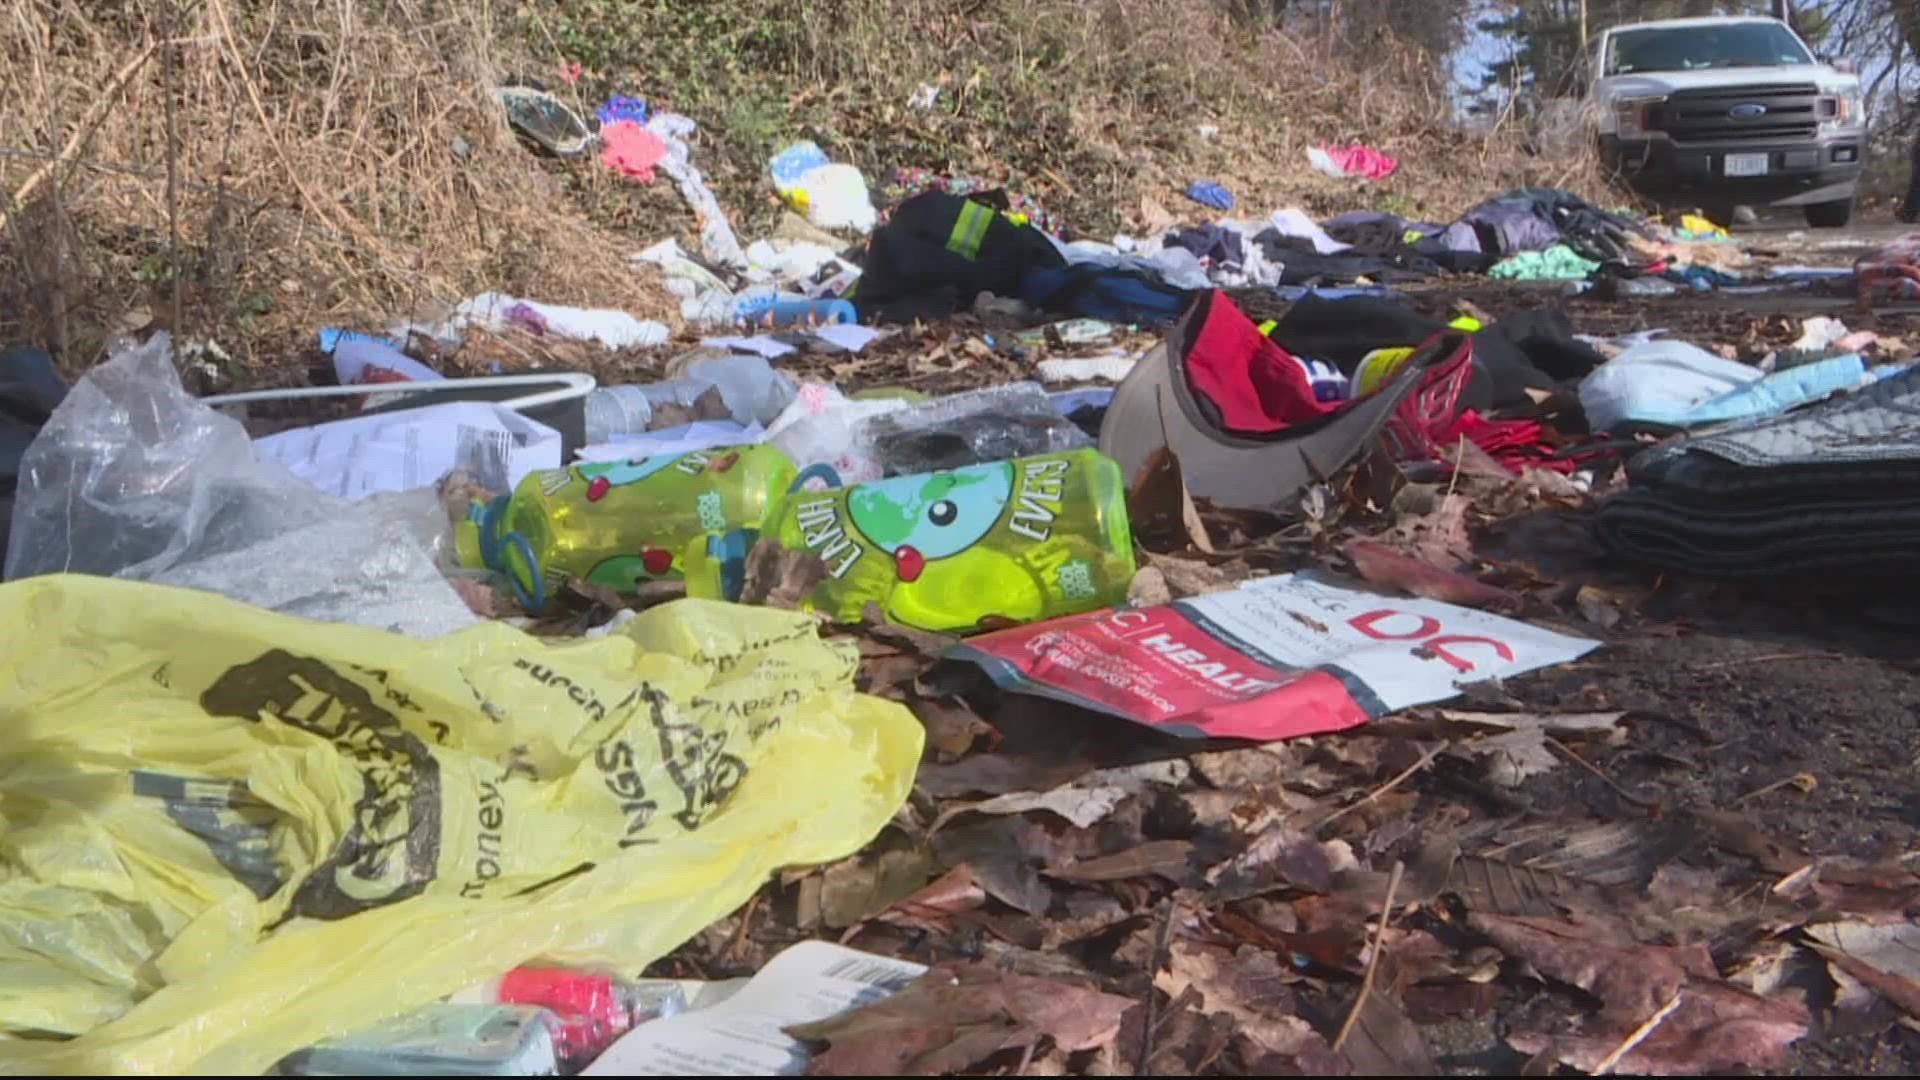 Illegal dumping is a persistent problem in D.C., and investigators are working to track down the culprits.